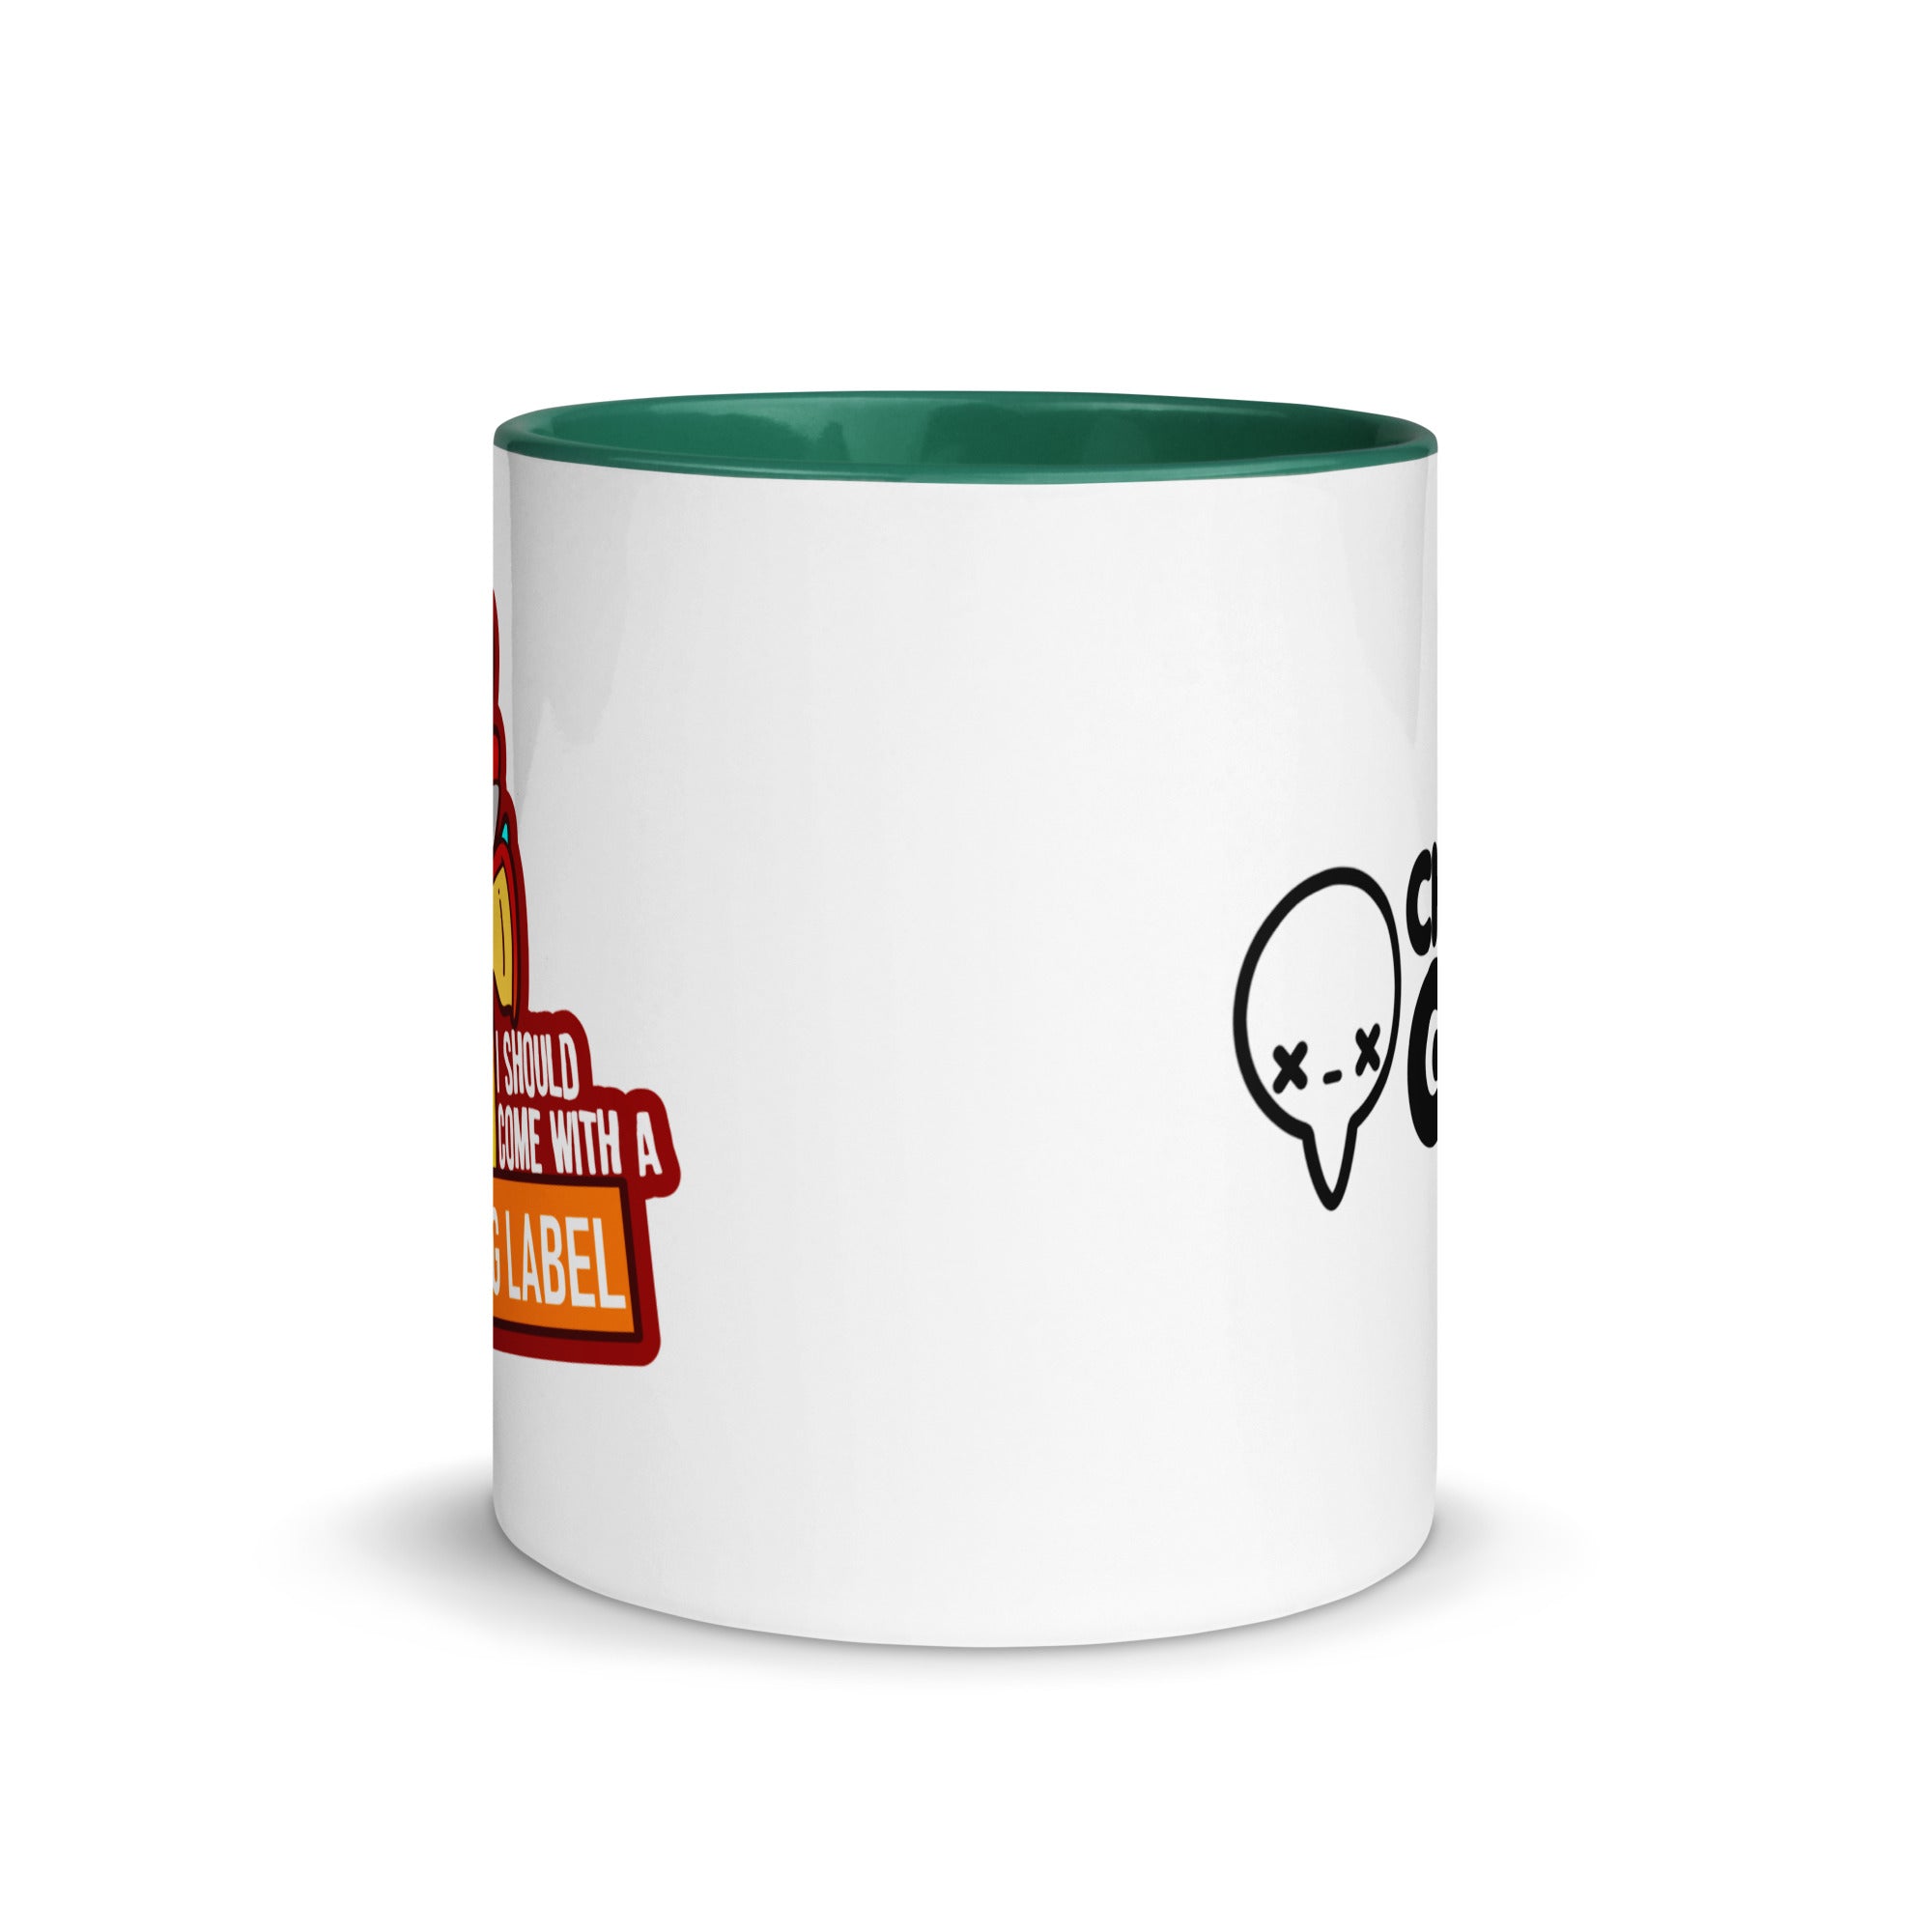 I SHOULD COME WITH A WARNING LABEL - Mug With Color Inside - ChubbleGumLLC